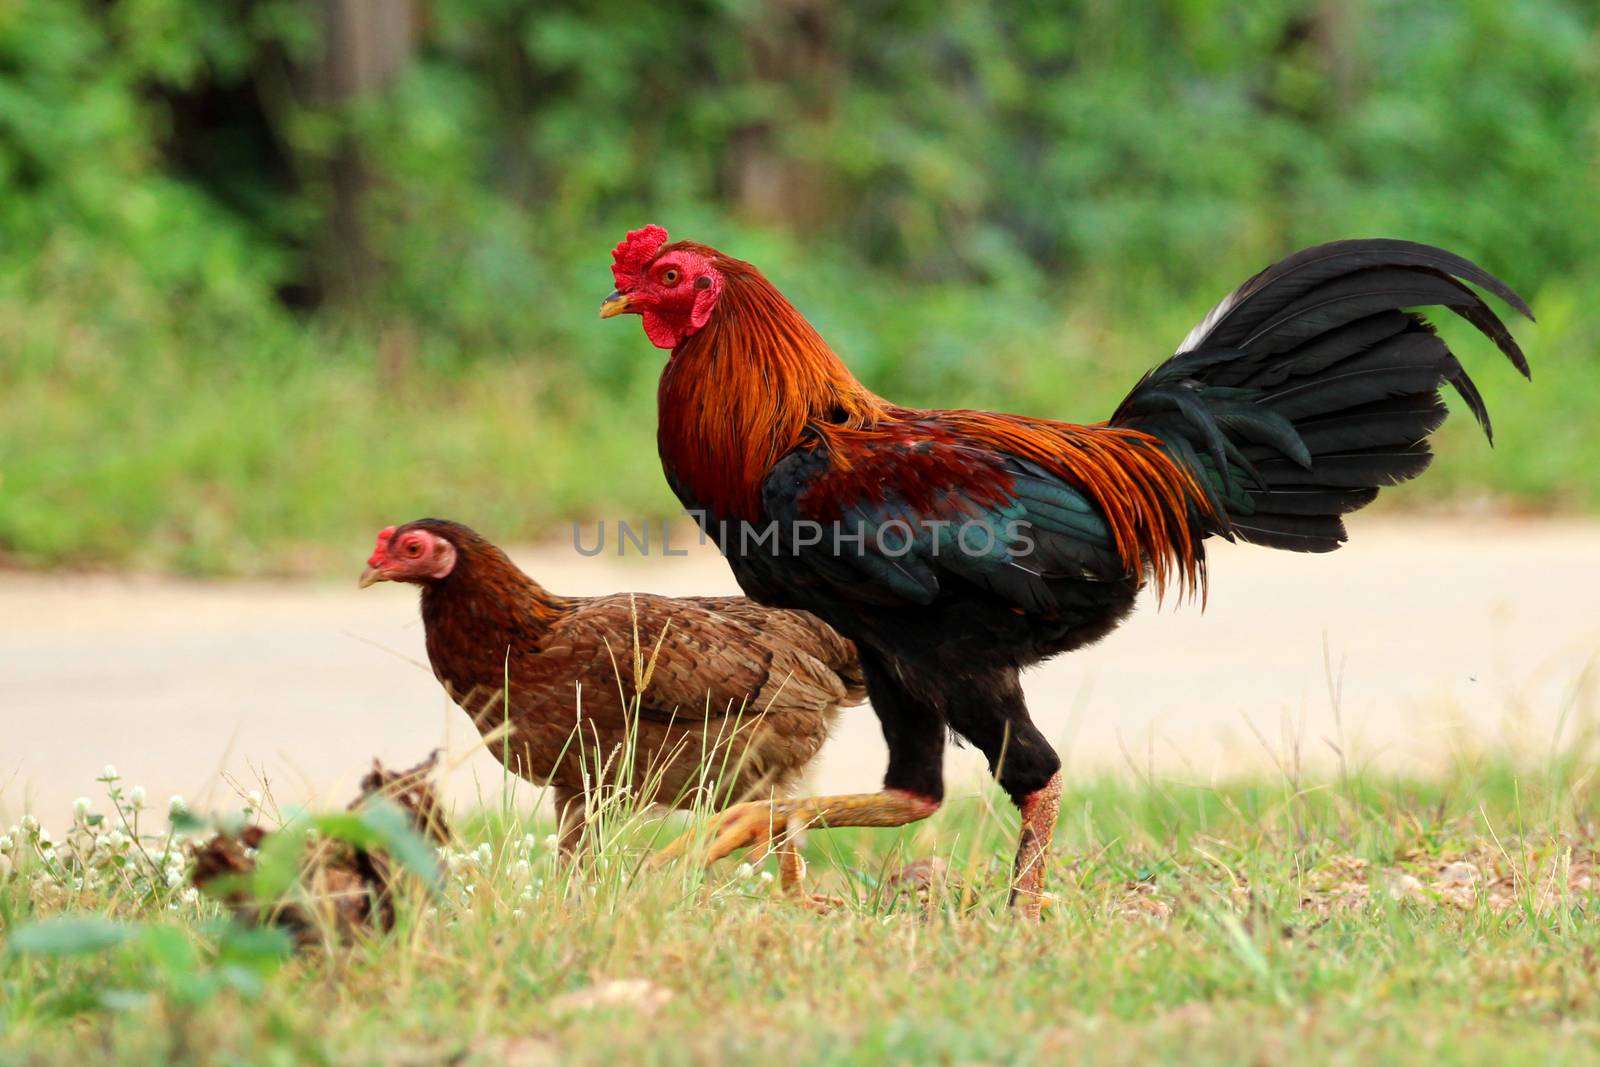 Image of rooster and hen in green grass field.